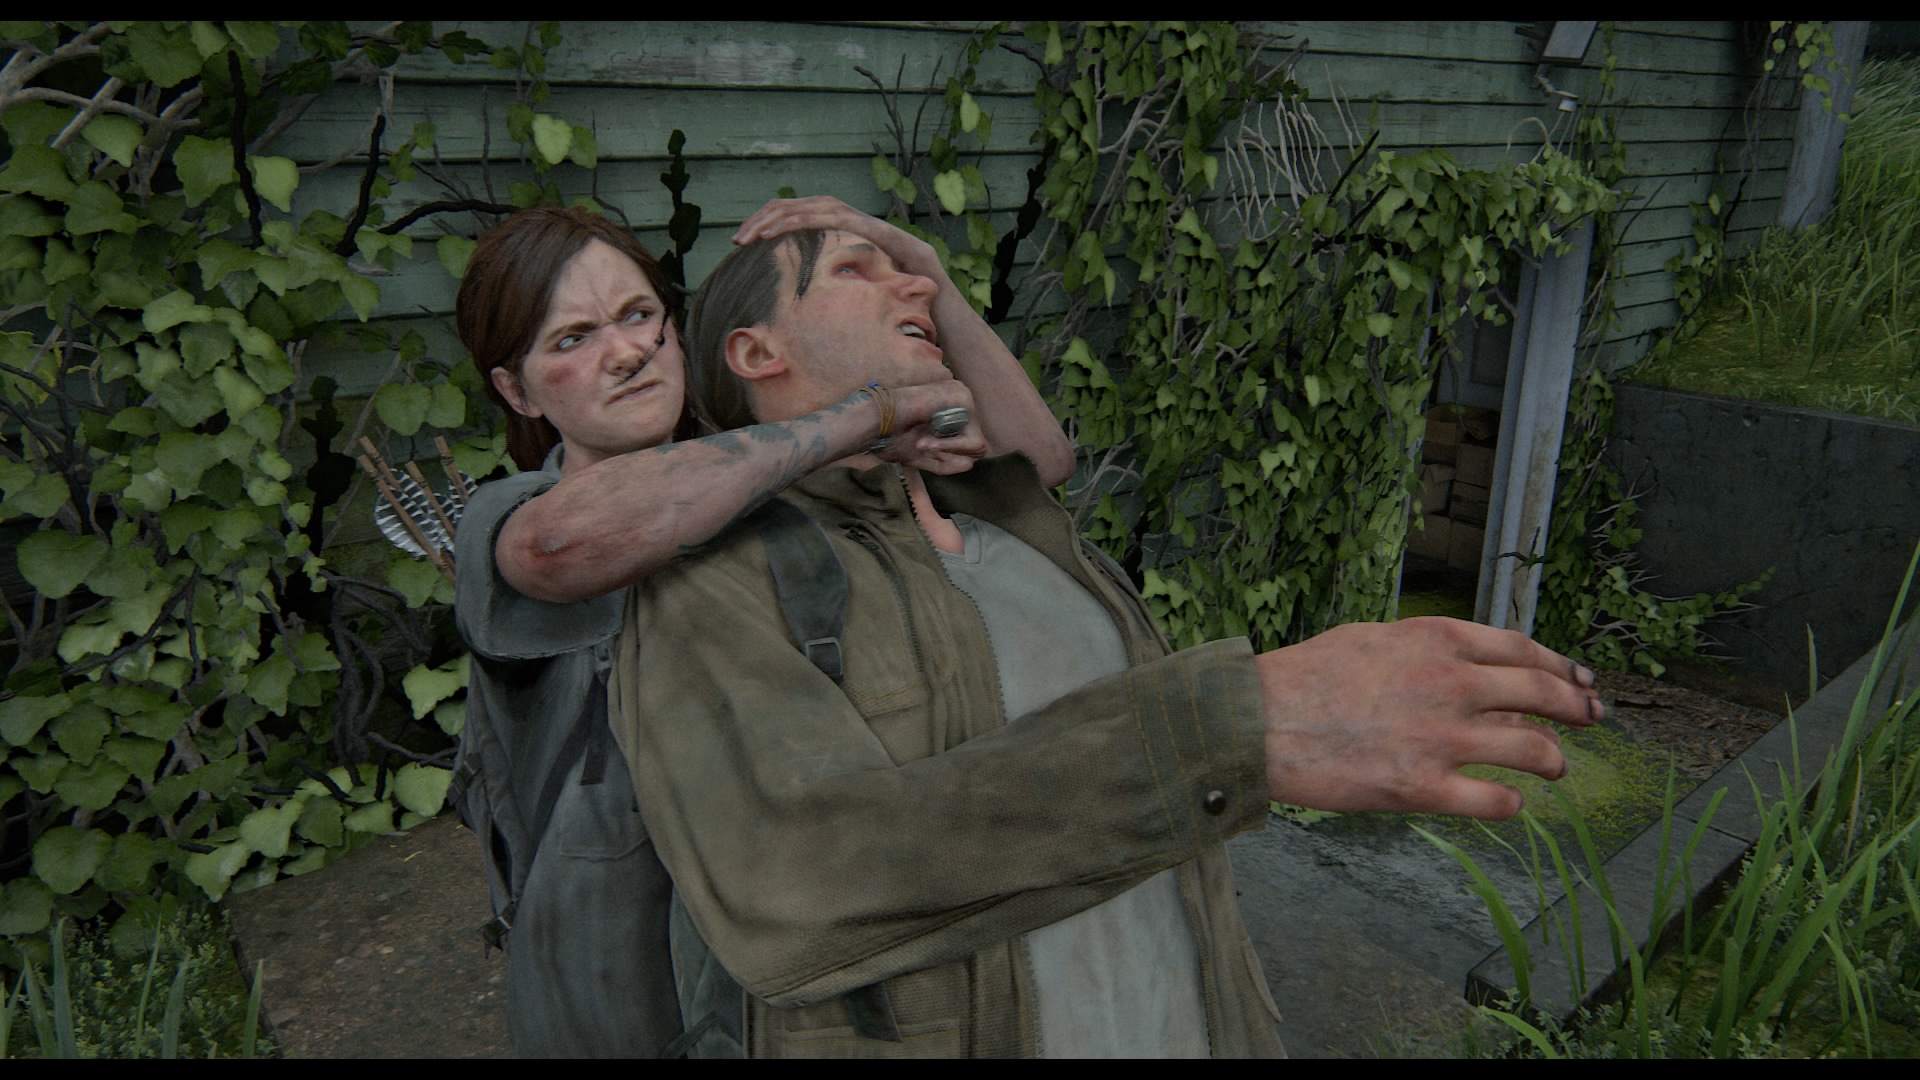 Last of Us 2's Most Horrific Death Is Straight Out of The Walking Dead